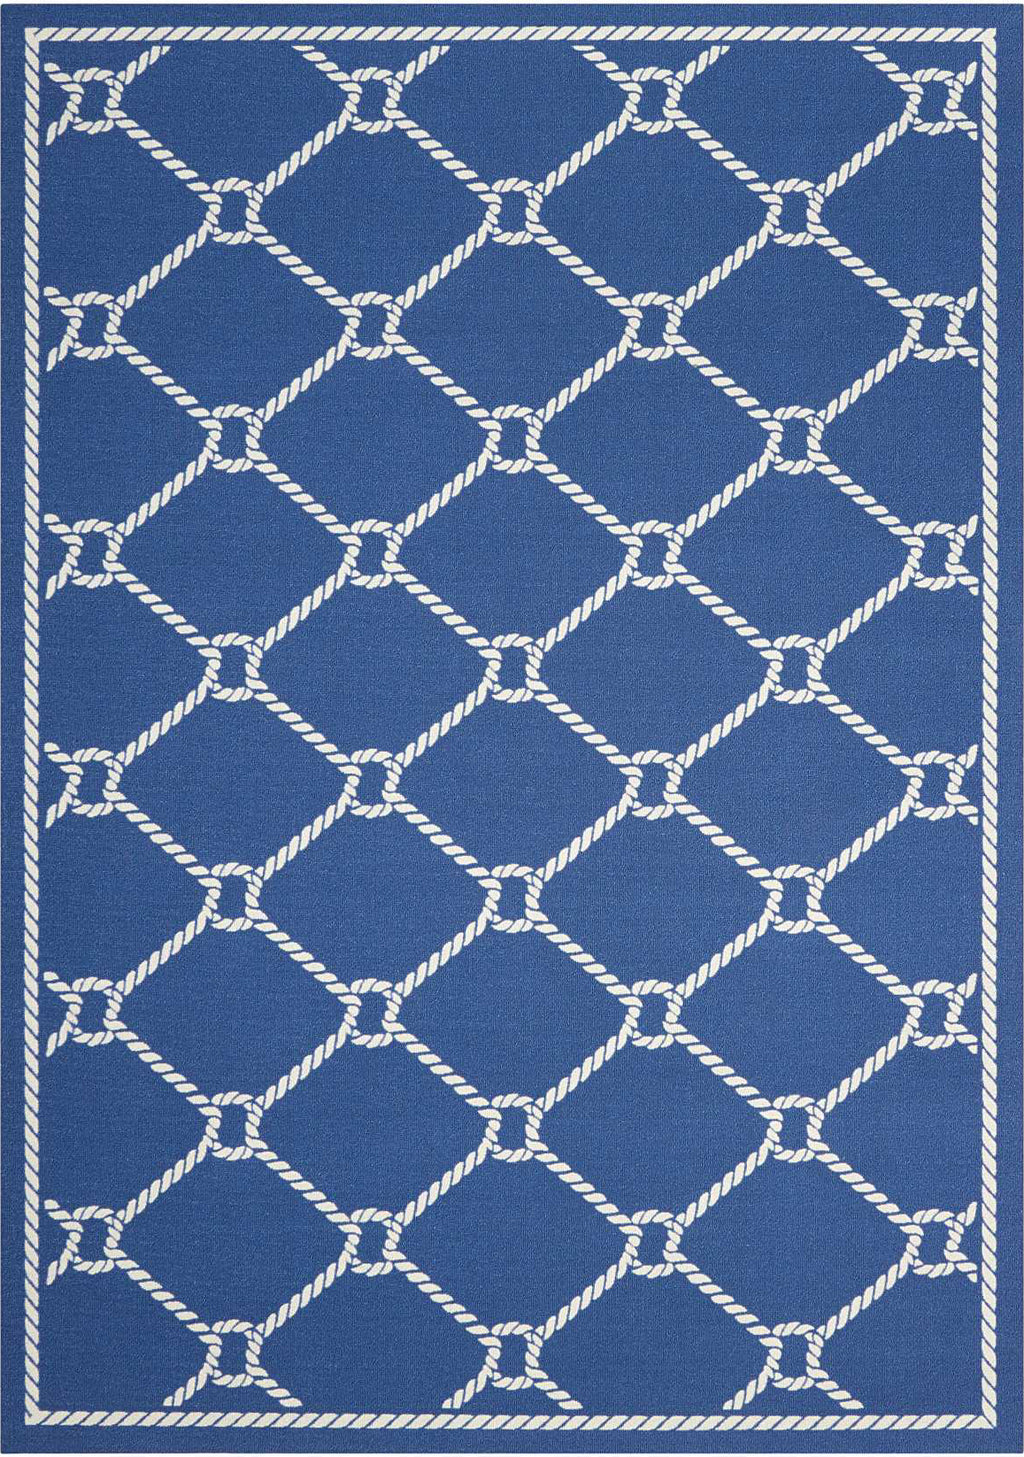 Nourison Wav01/Sun and Shade SND41 Navy Area Rug by Waverly